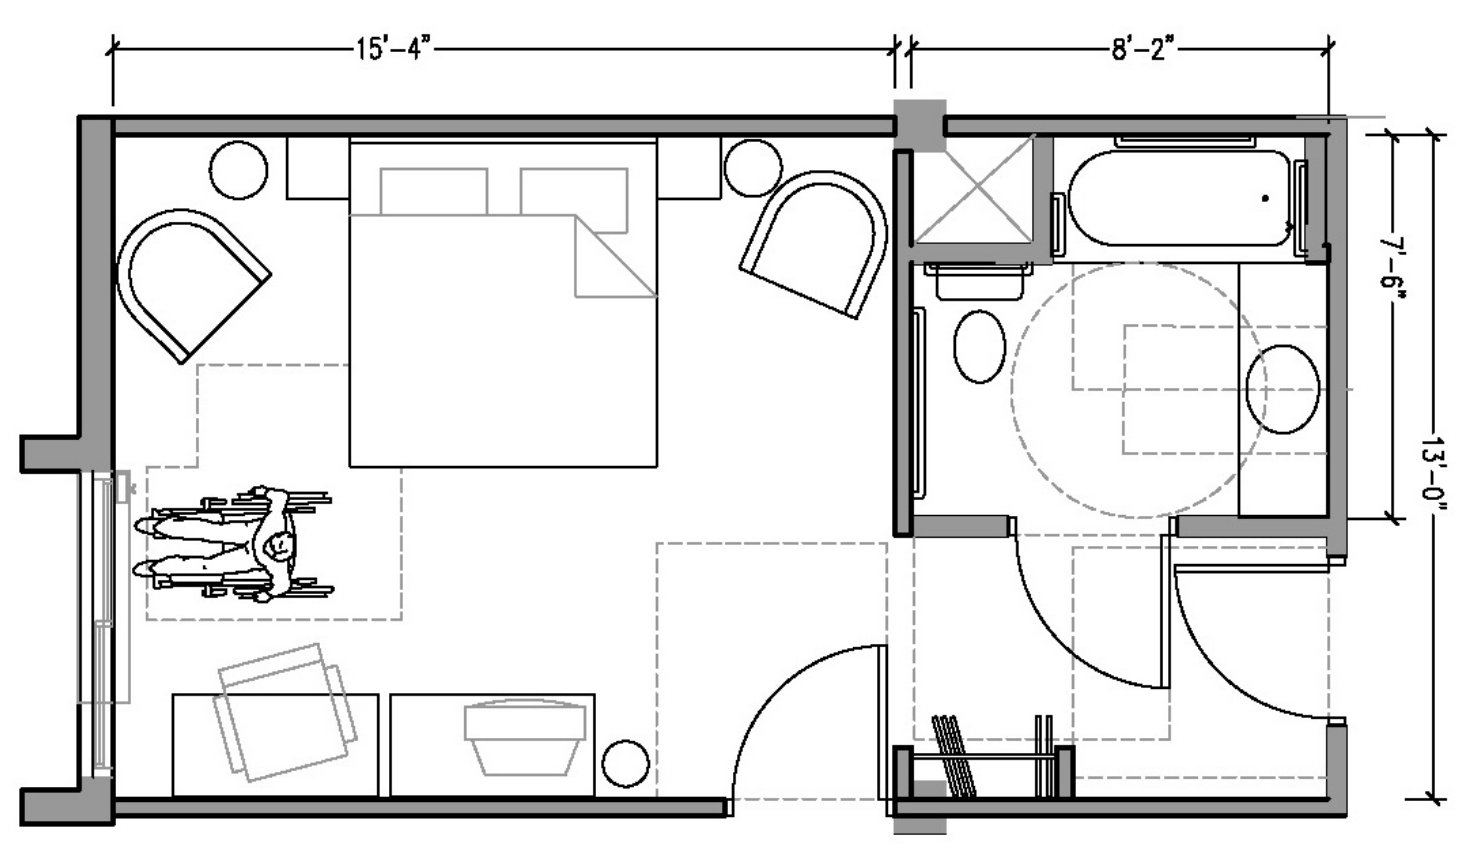 Floor plan of a hotel room showing basic dimensions of each room